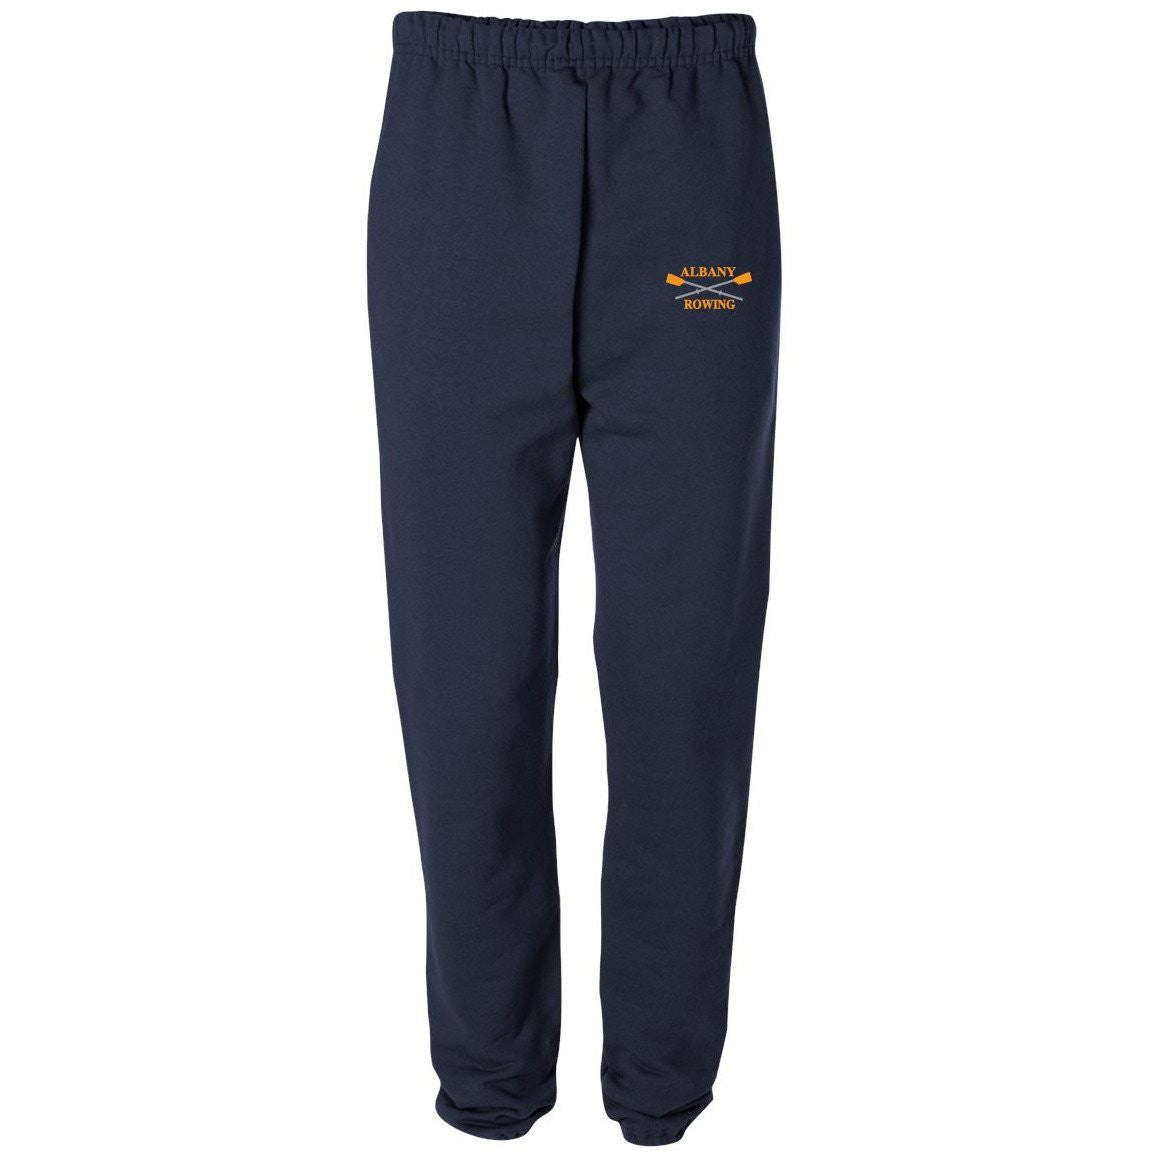 Team Albany Rowing Center Sweatpants